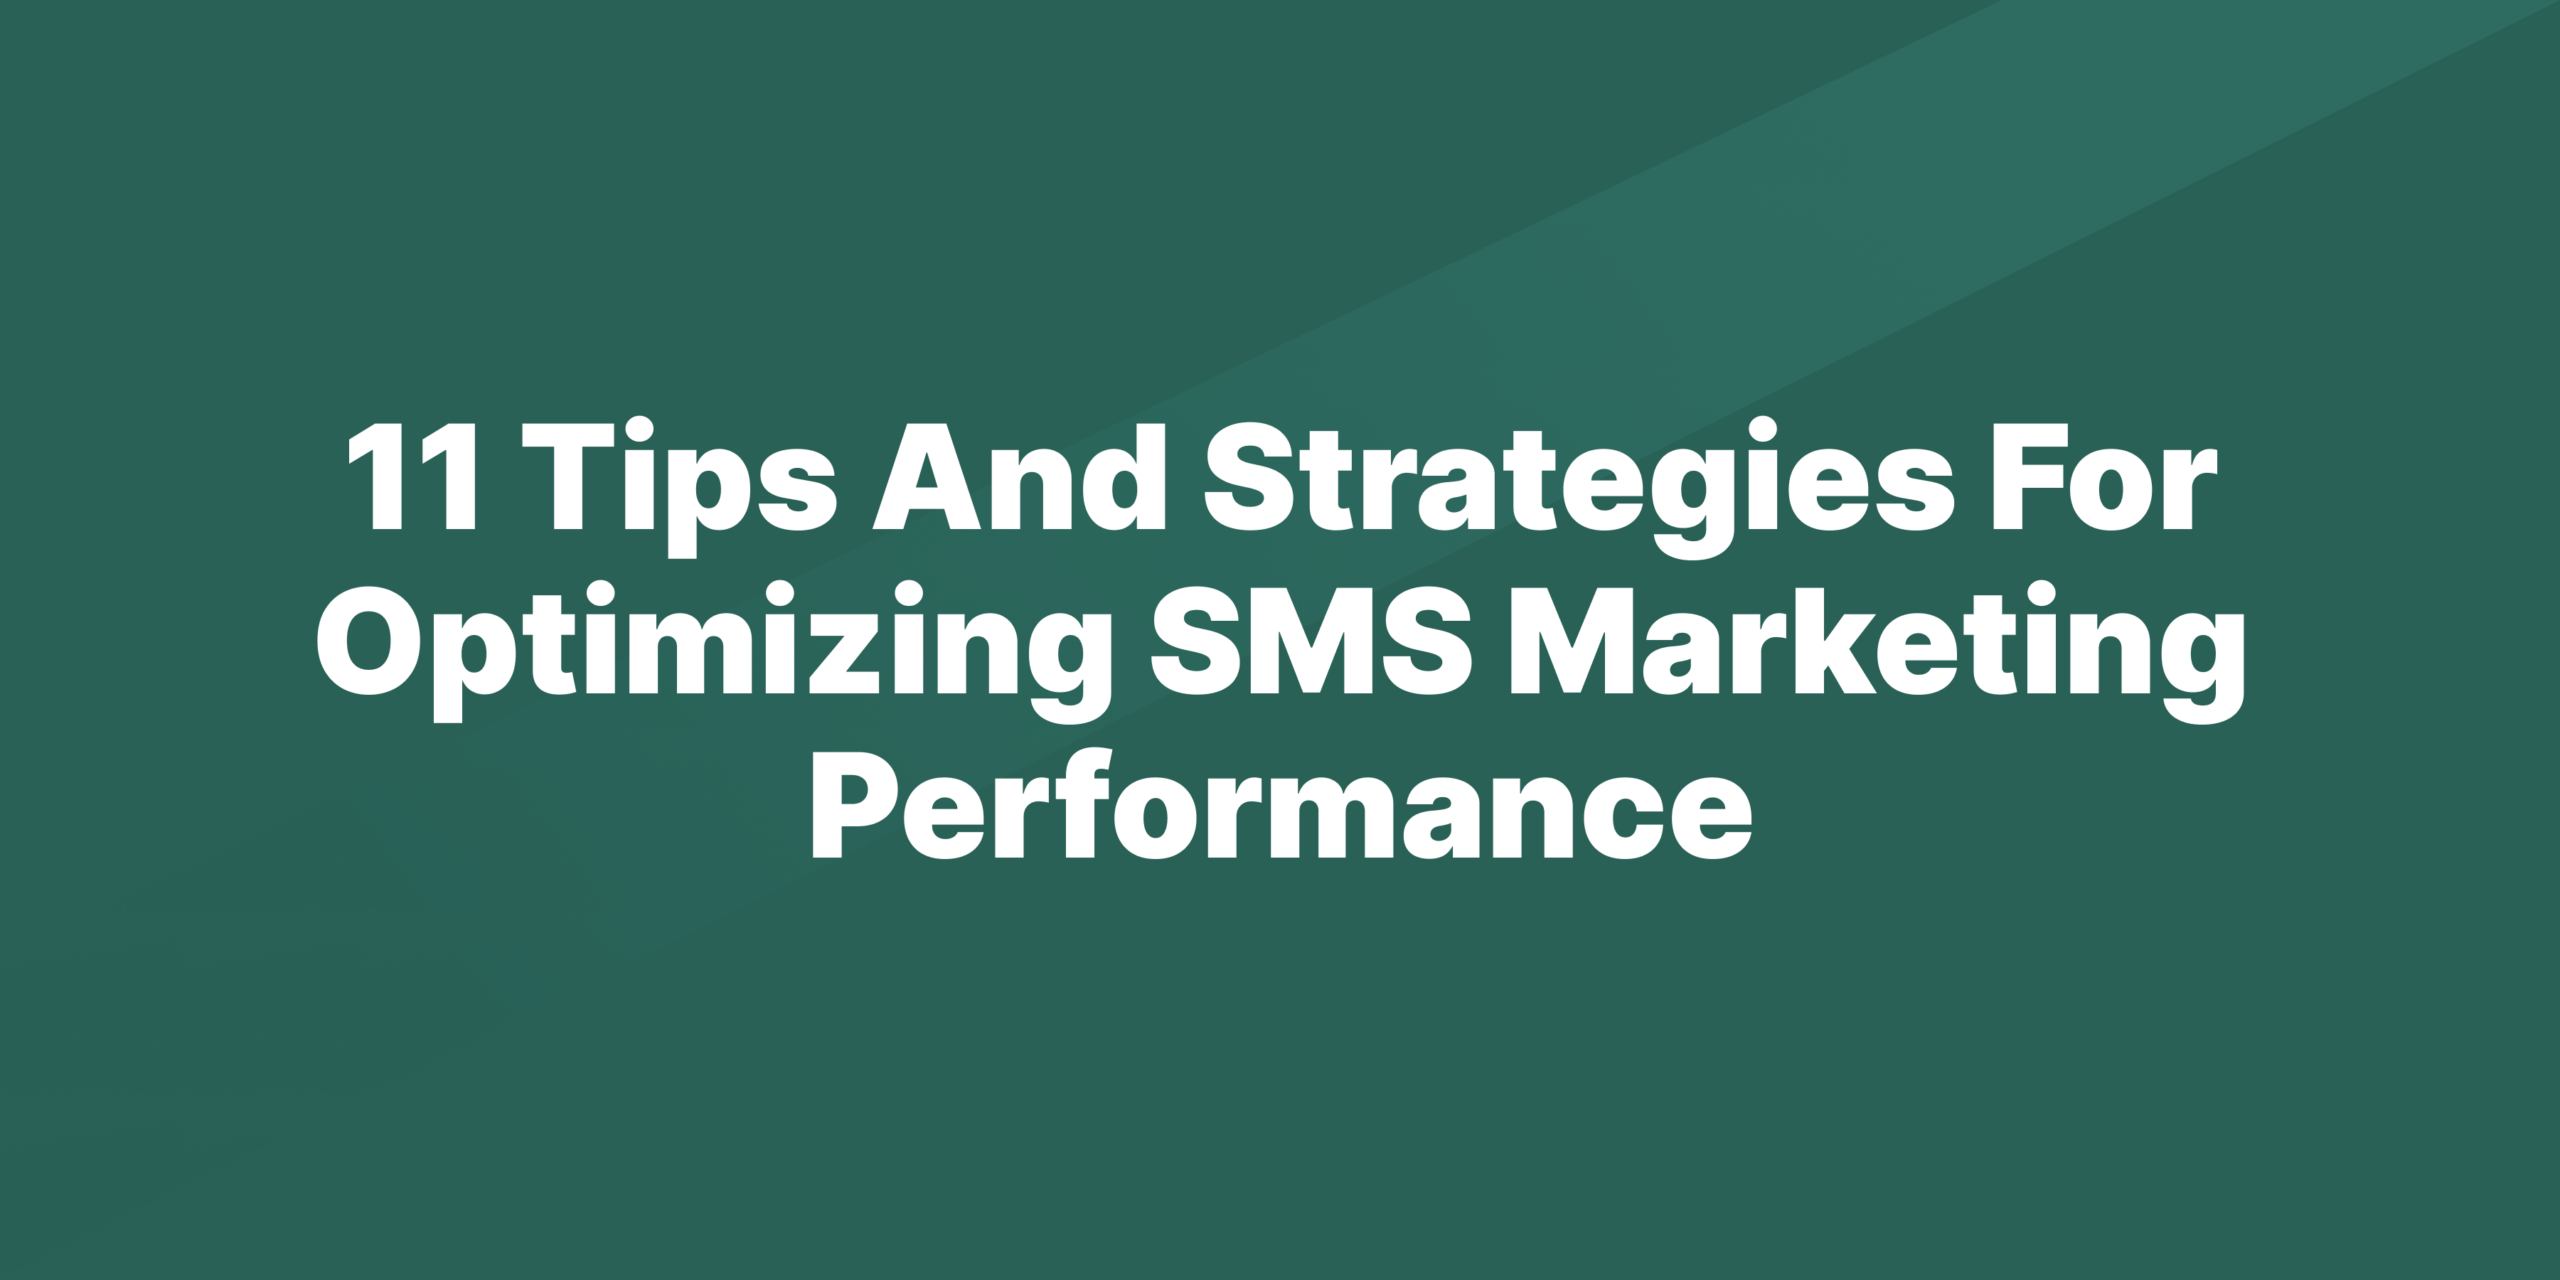 Tips and Strategies for Optimizing SMS Marketing Performance